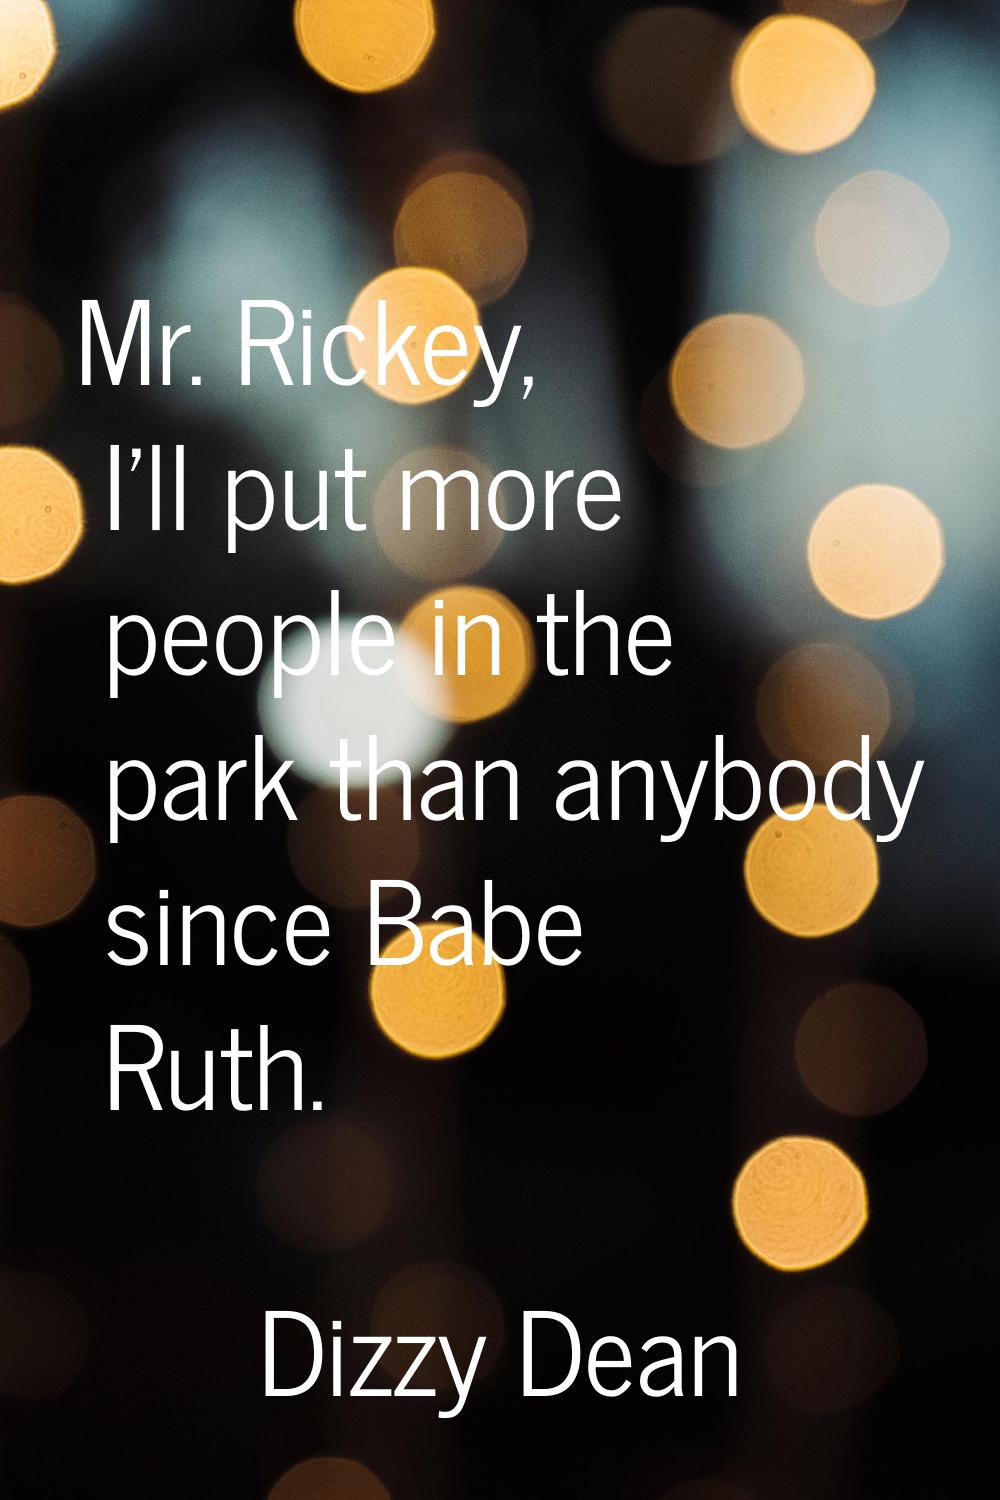 Mr. Rickey, I'll put more people in the park than anybody since Babe Ruth.